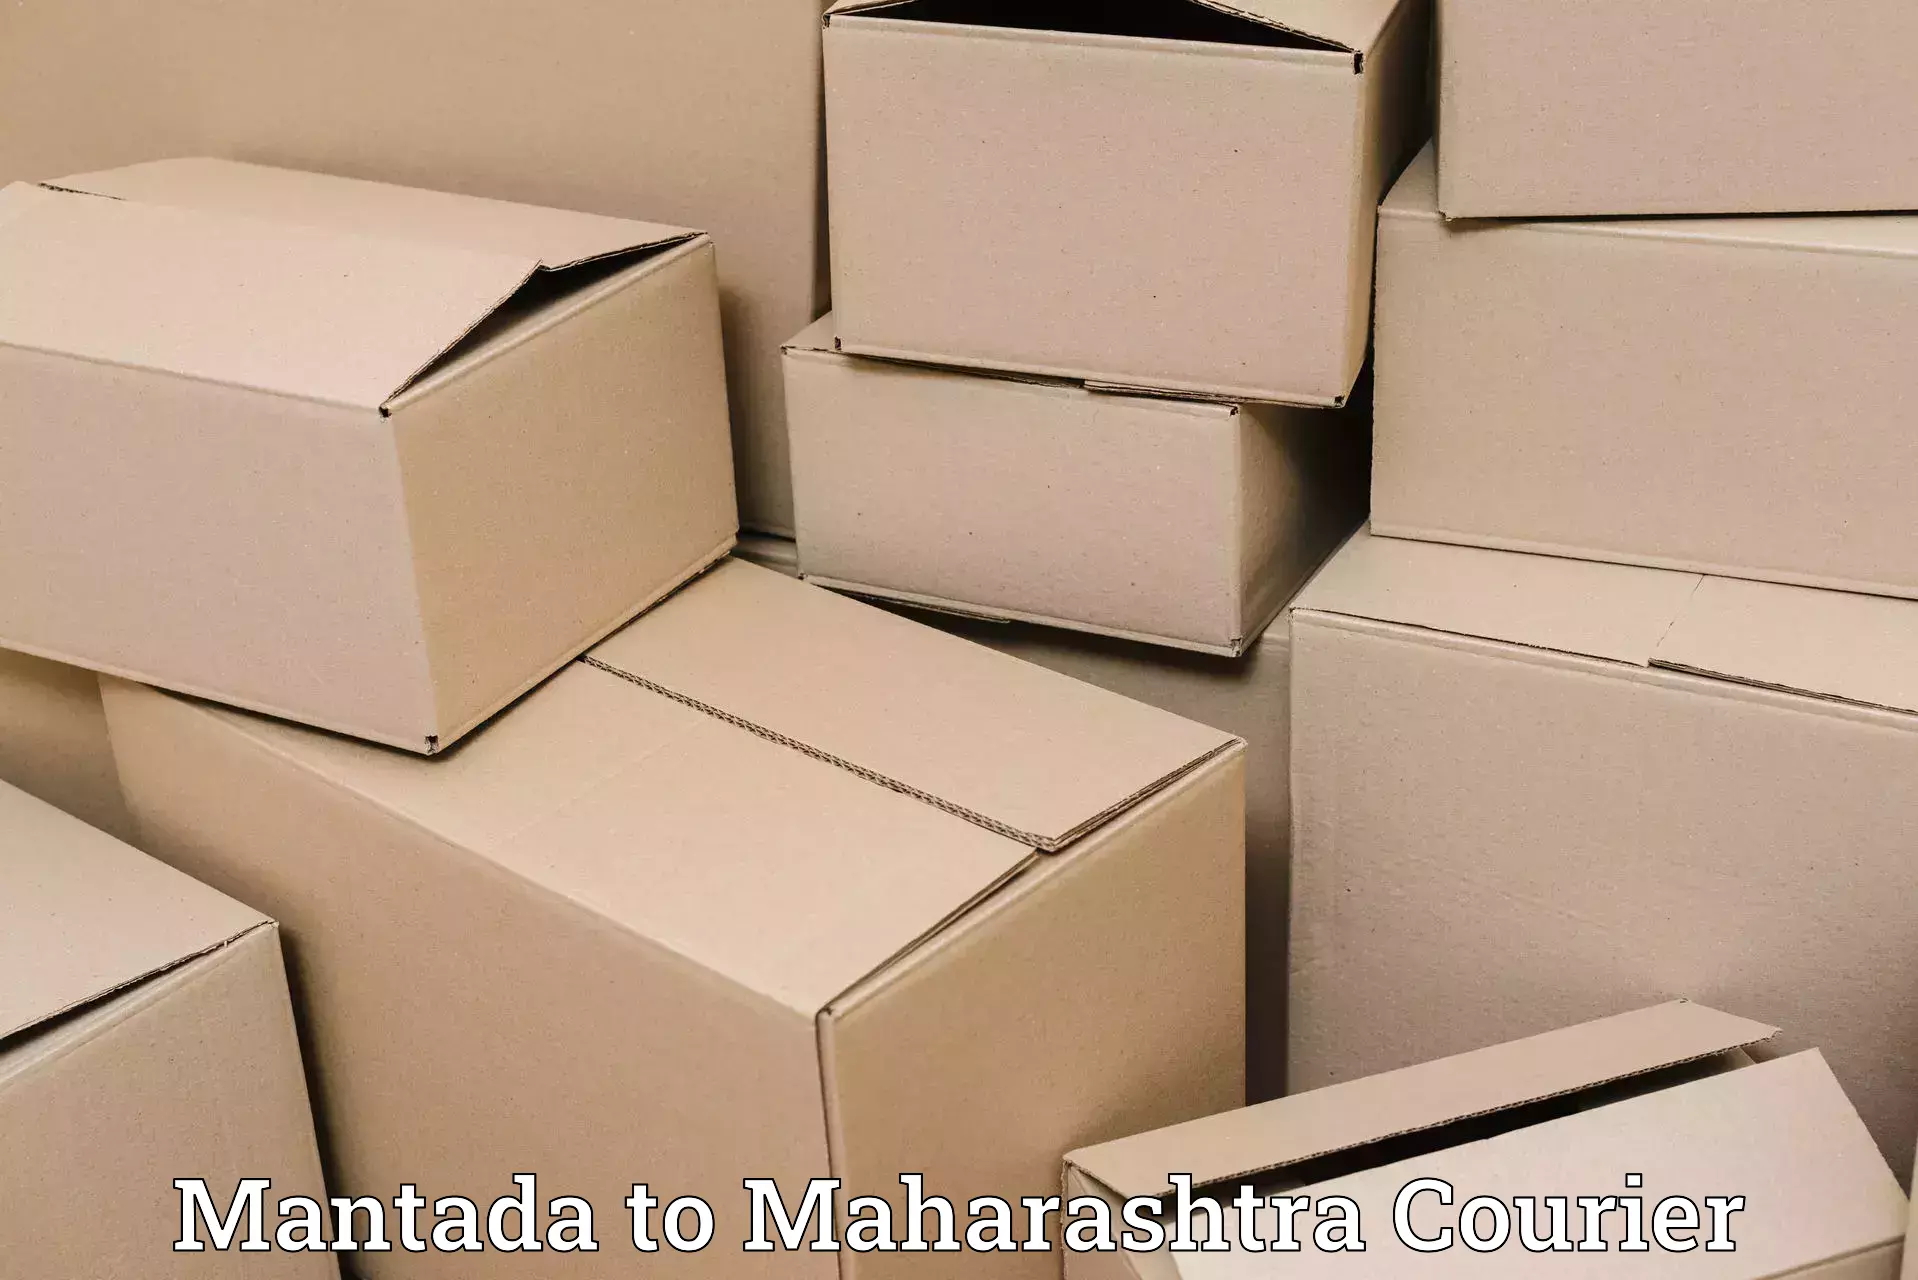 Business delivery service Mantada to IIIT Pune